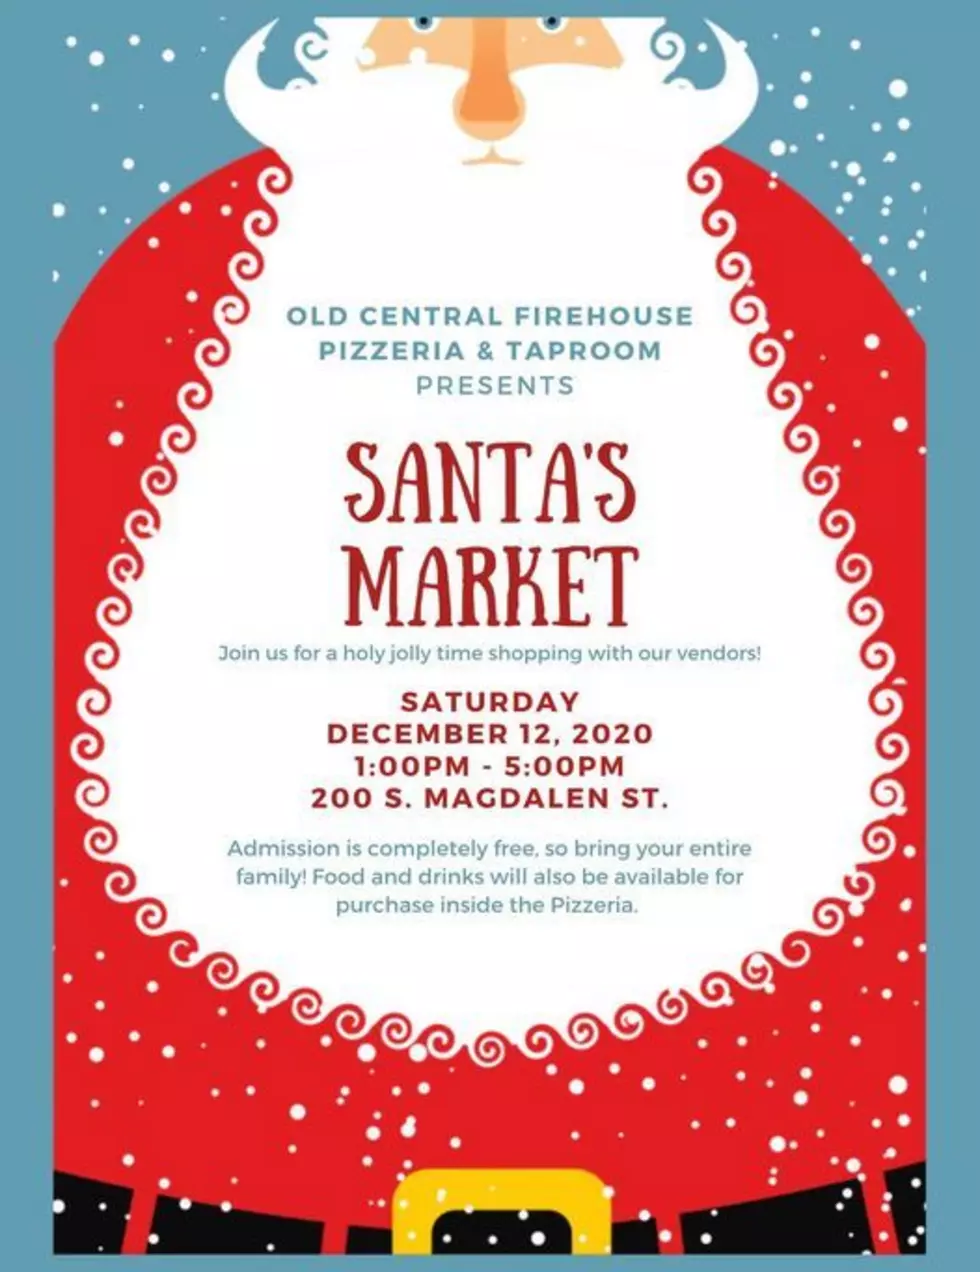 It's Santa's Market Saturday At The Old Central Firehouse